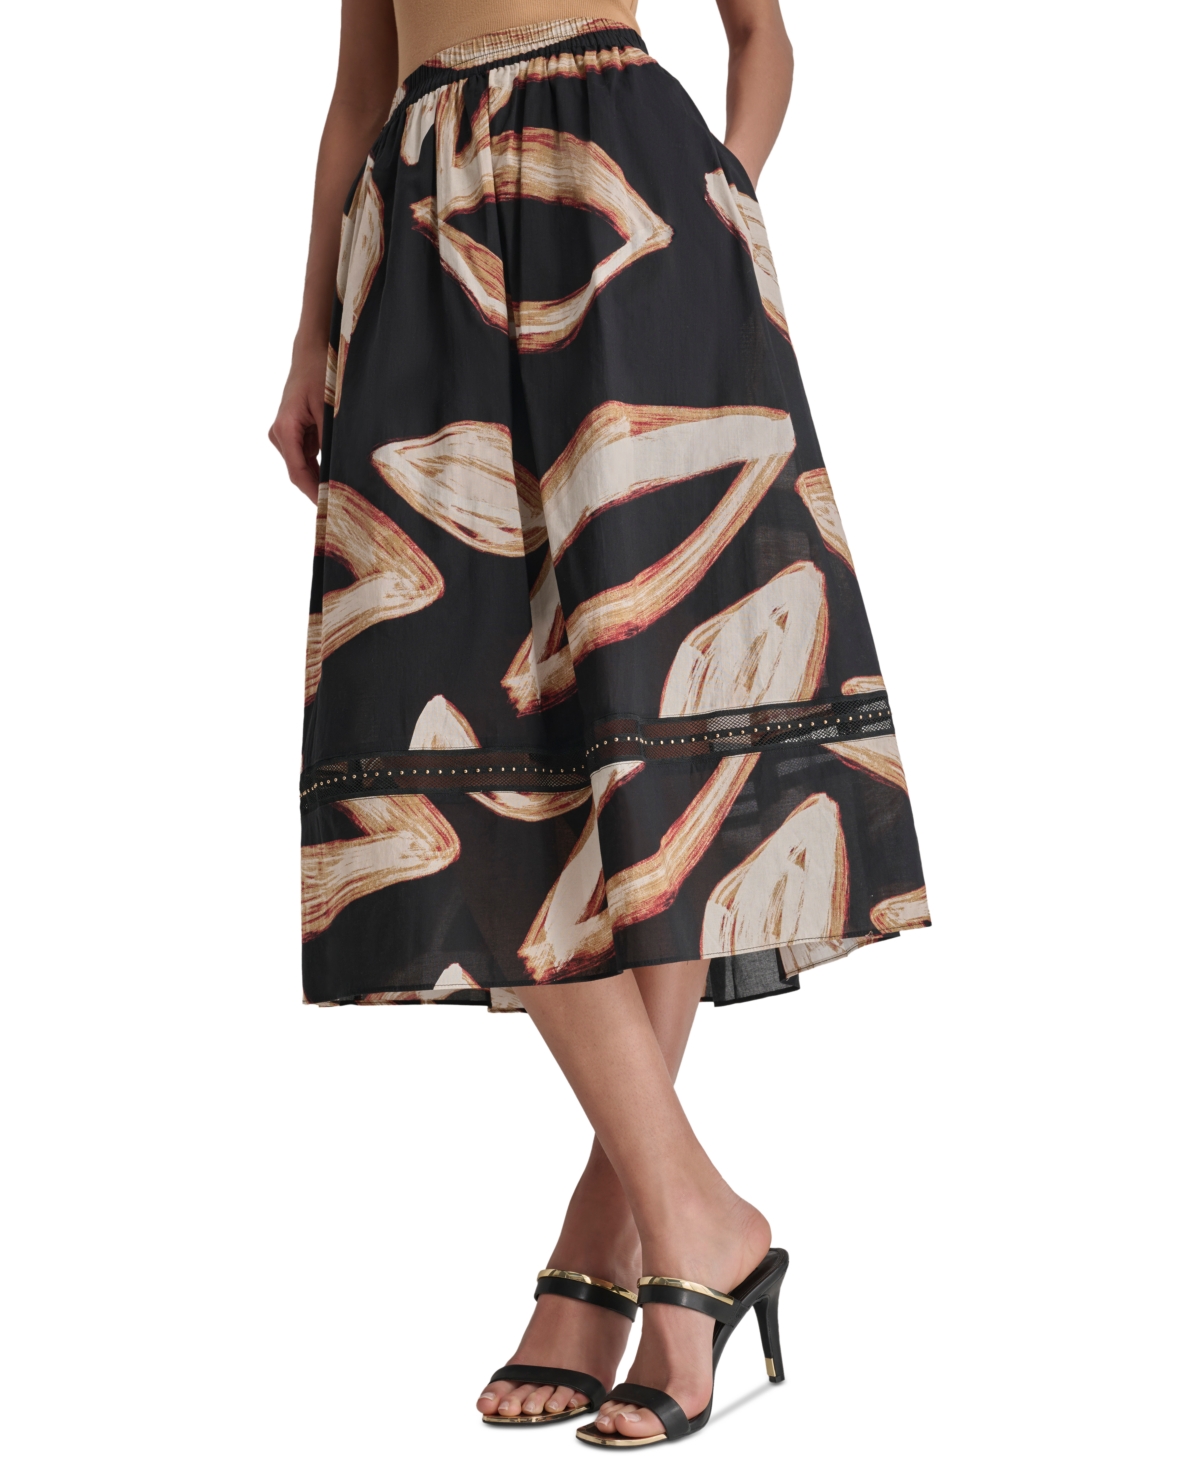 Women's Printed Studded Cotton A-Line Skirt - Rpld Inkbl